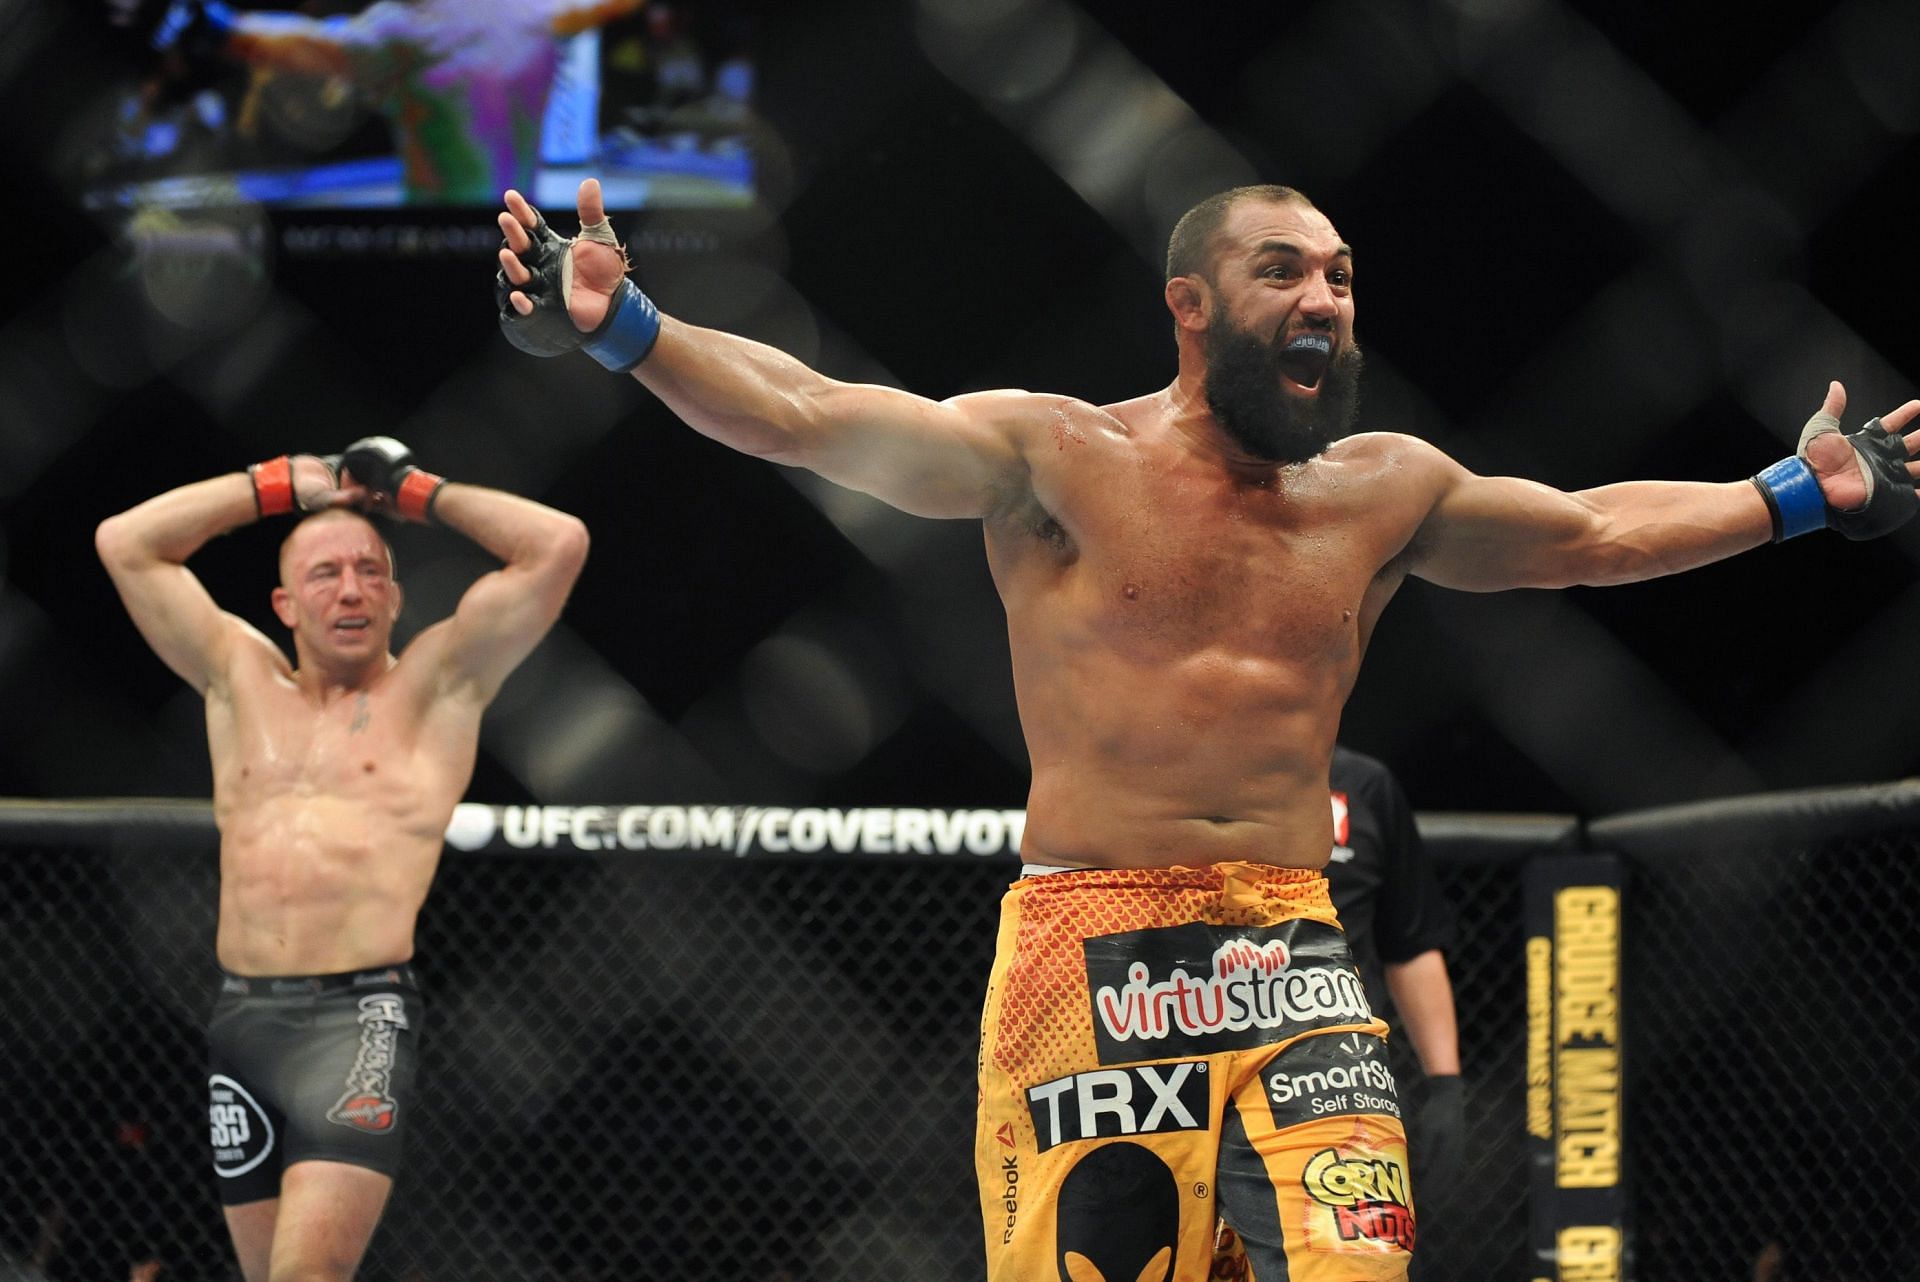 Johny Hendricks came closer than any other fighter to beating Georges St-Pierre